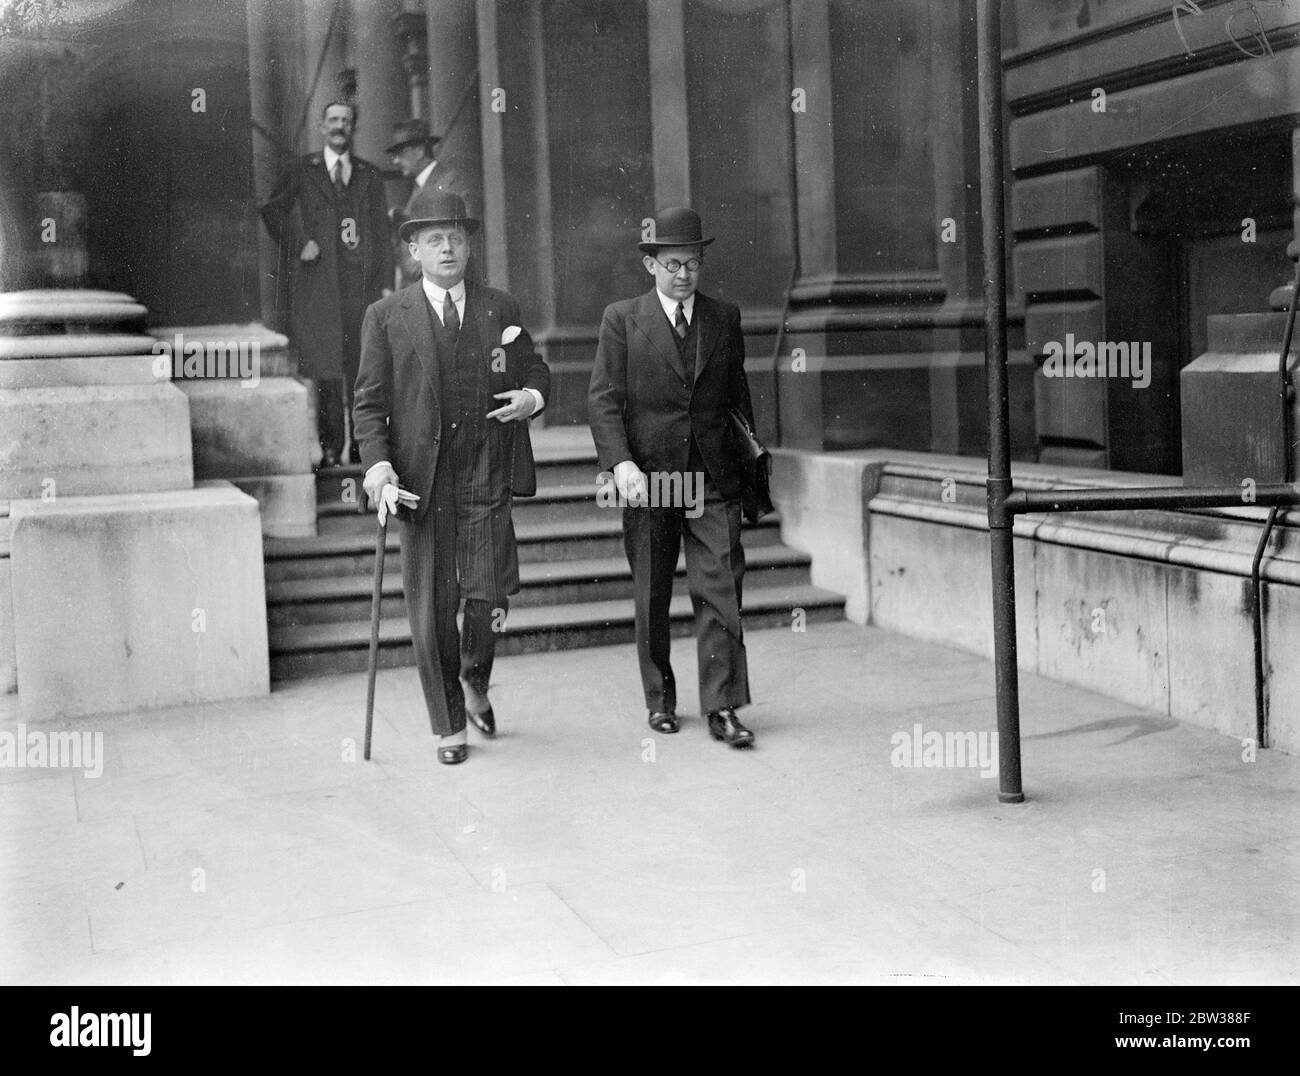 Hitler ' s envoy at the Foreign Office . Herr Joachim von Ribbentrop , Hitler ' s personal envoy , visited the Foreign office in London to see Sir John Simon and try to discover whether there is any solution of the disarmament difficultes . Photo shows , Herr von Ribbentrop leaving the Foreign Office . 10 May 1934 Stock Photo